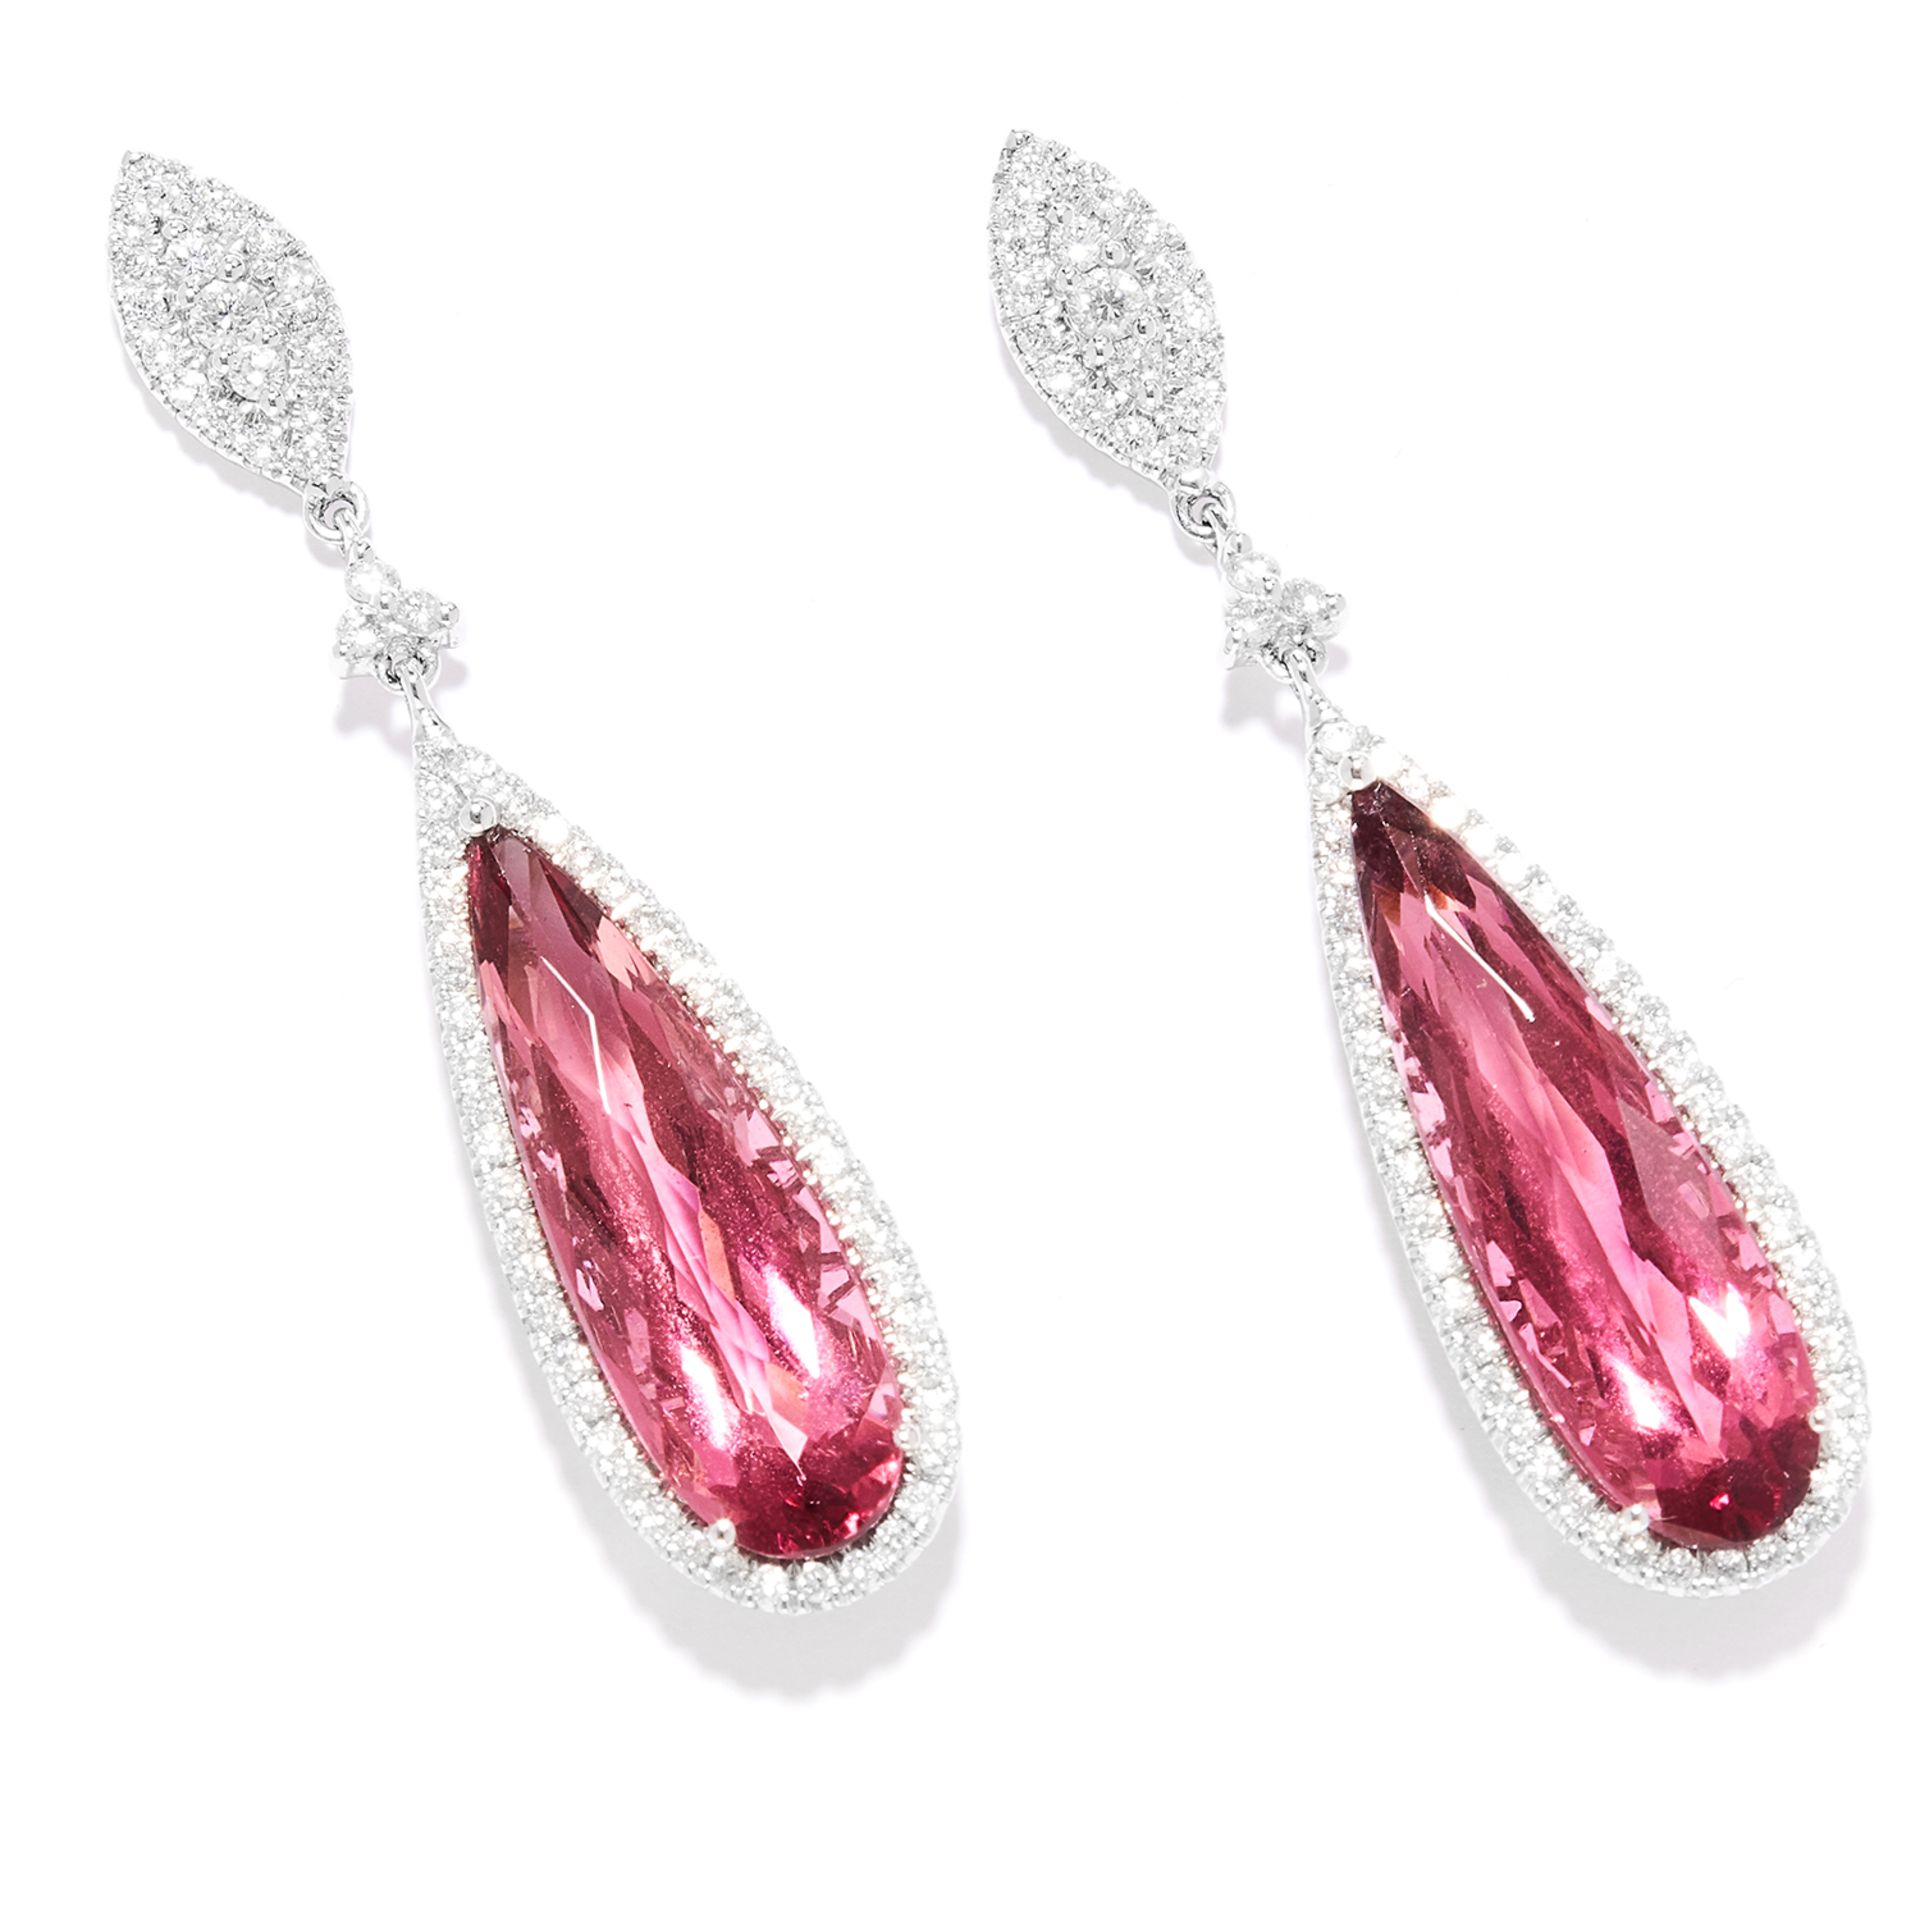 TOURMALINE AND DIAMOND DROP EARRINGS in 18ct white gold, each set with round cut diamonds suspending